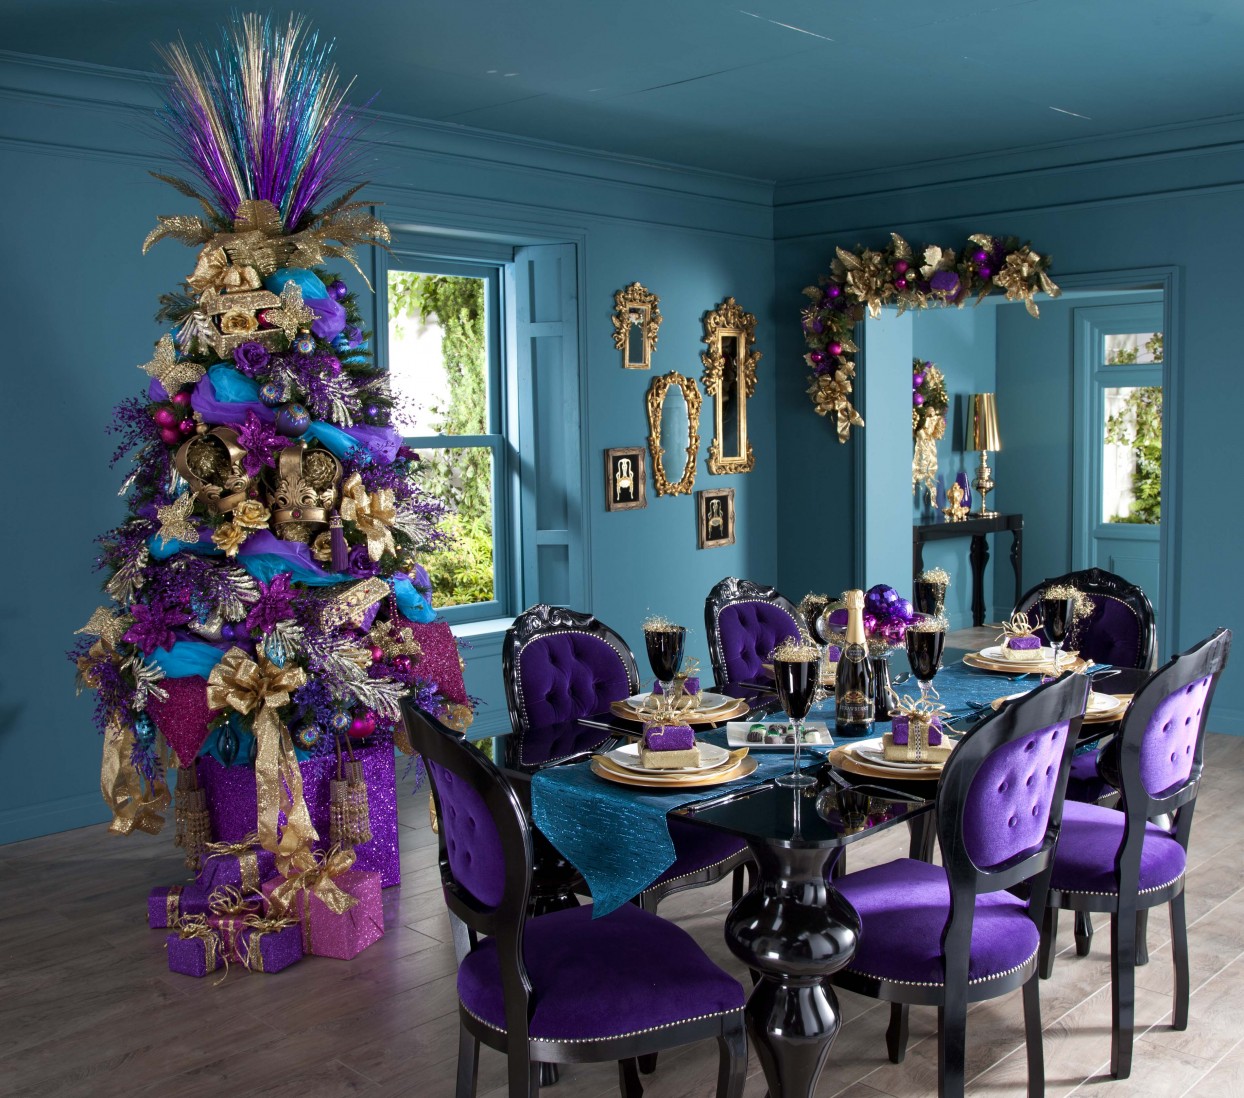 The Latest Christmas Decorating Ideas and Color Schemes